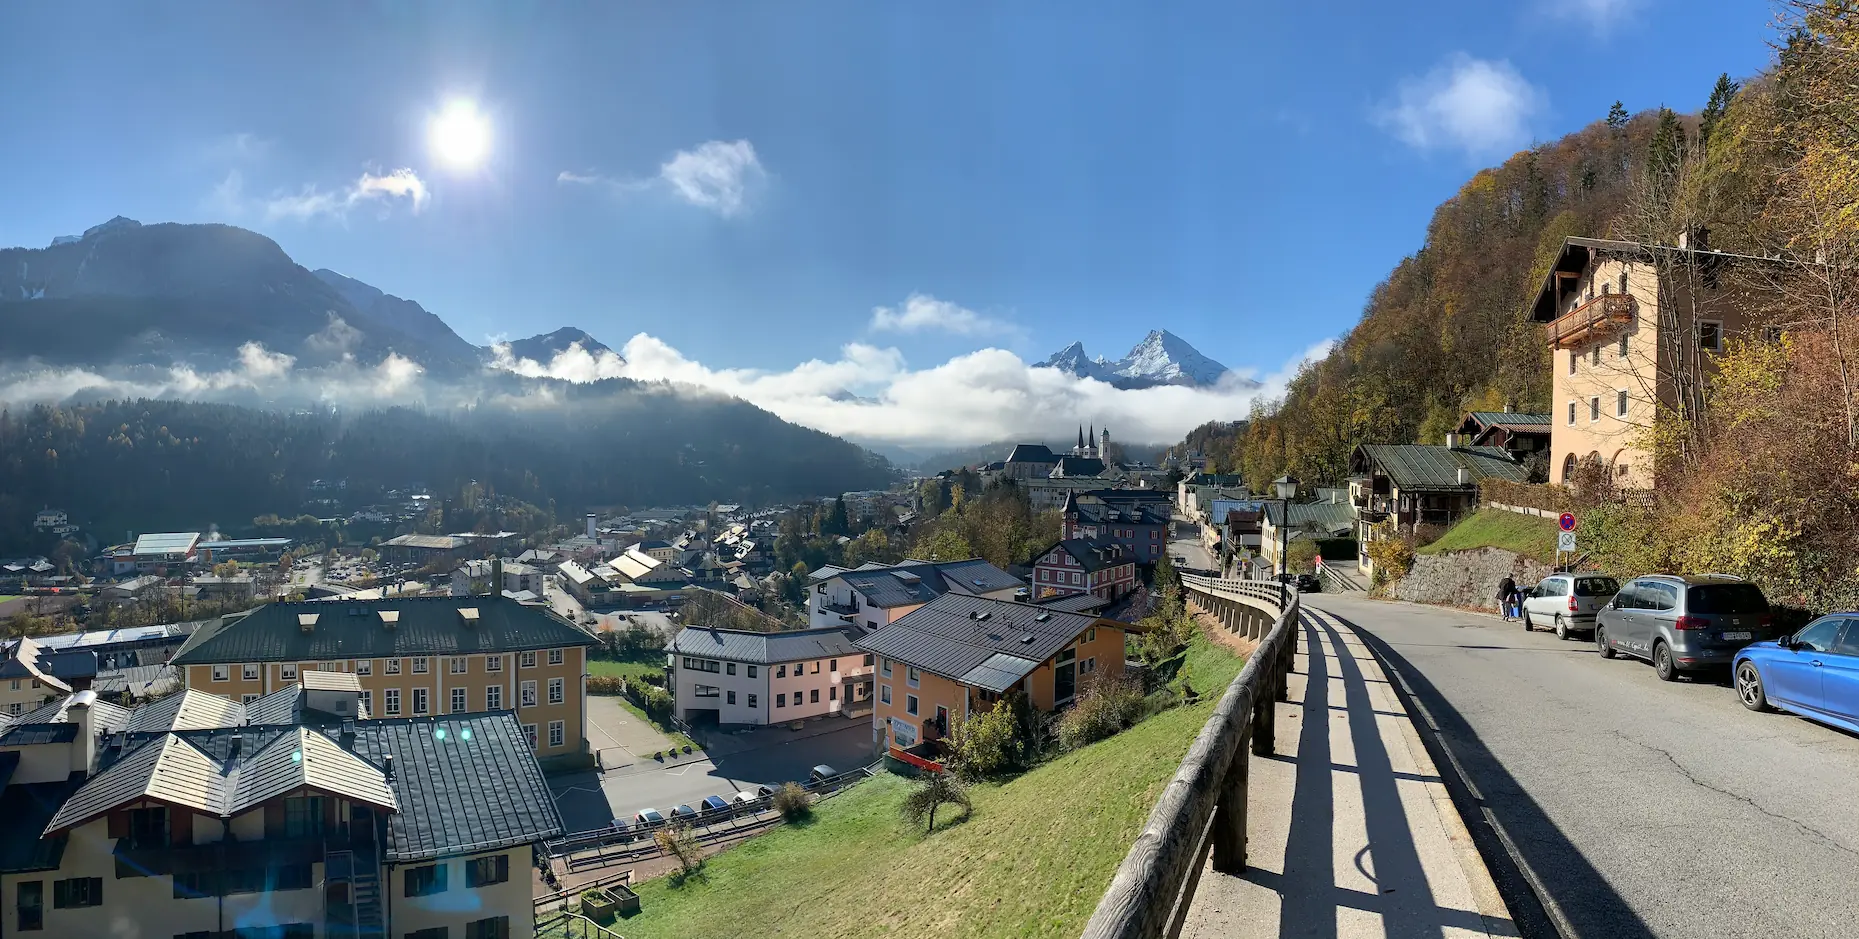 Panorama overlooking the town of Berchtesgaden, Germany. The Watzmann peak is visible in the background and covered in snow.